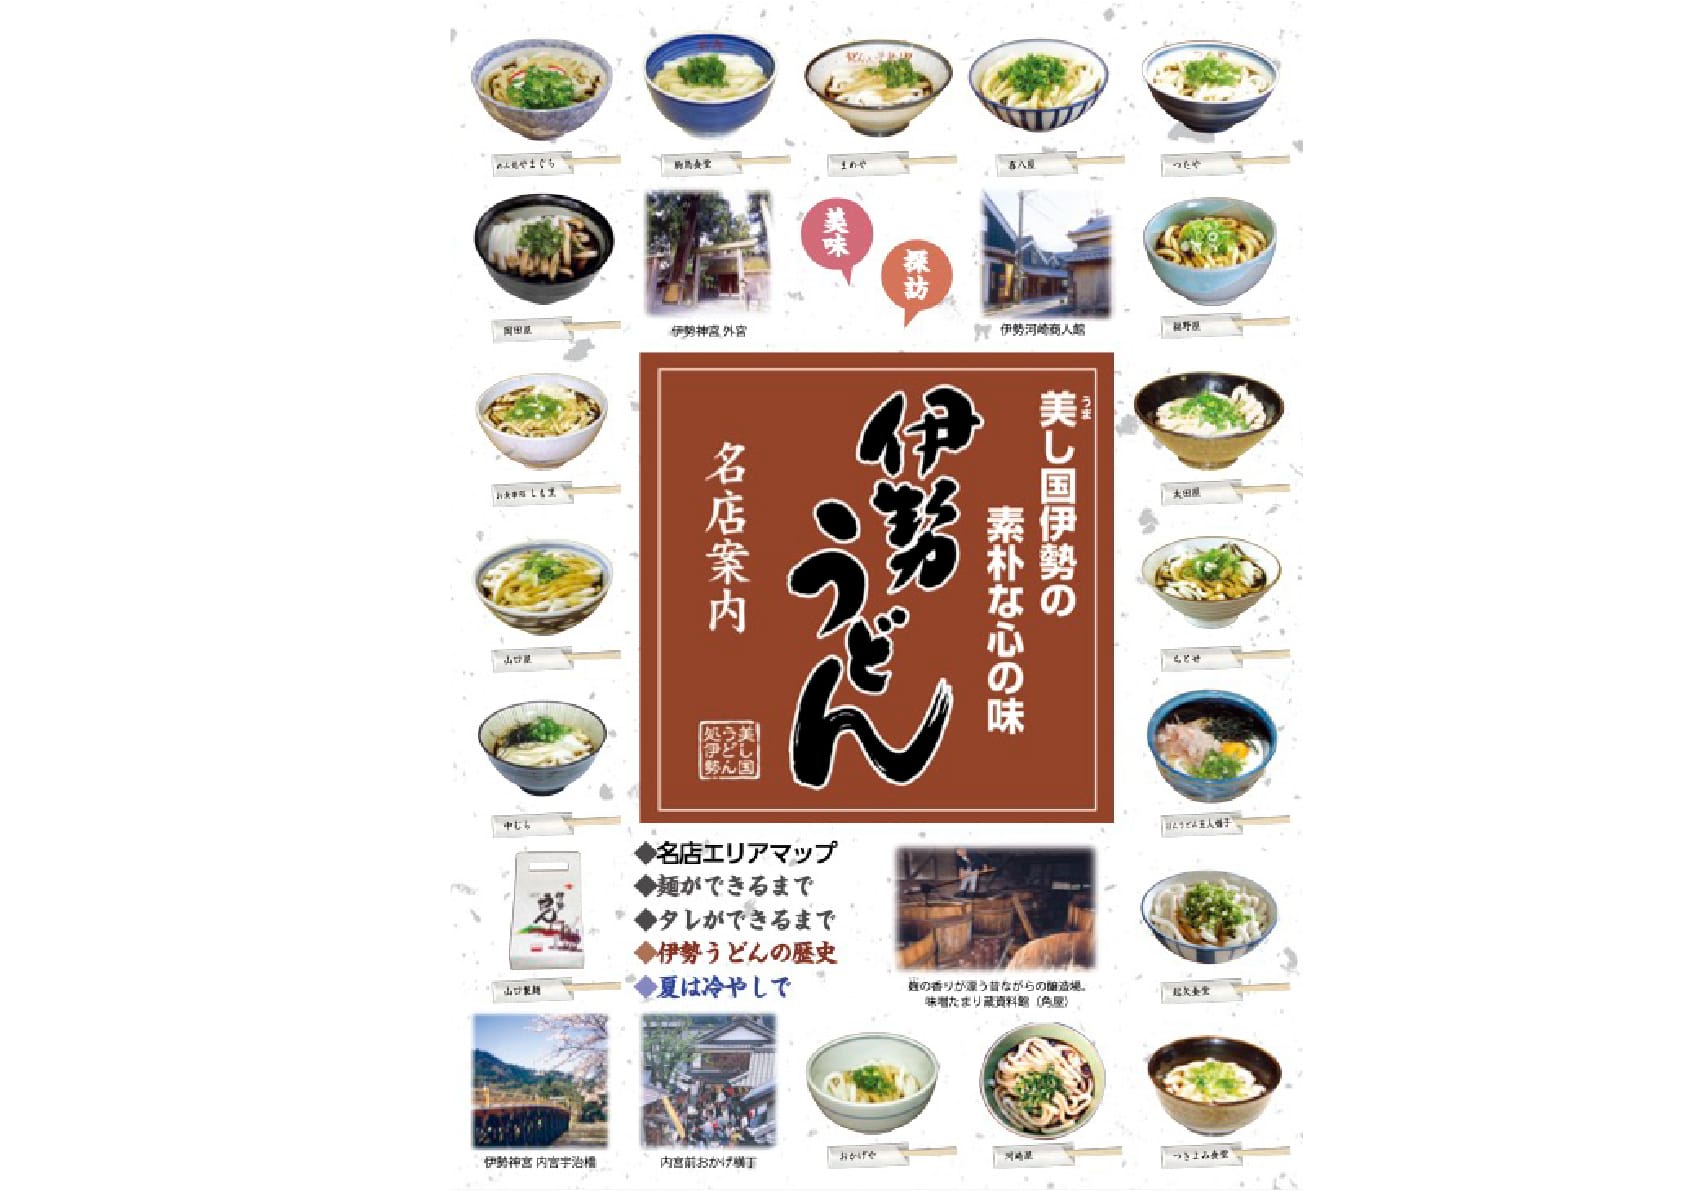 Ise udon famous store information